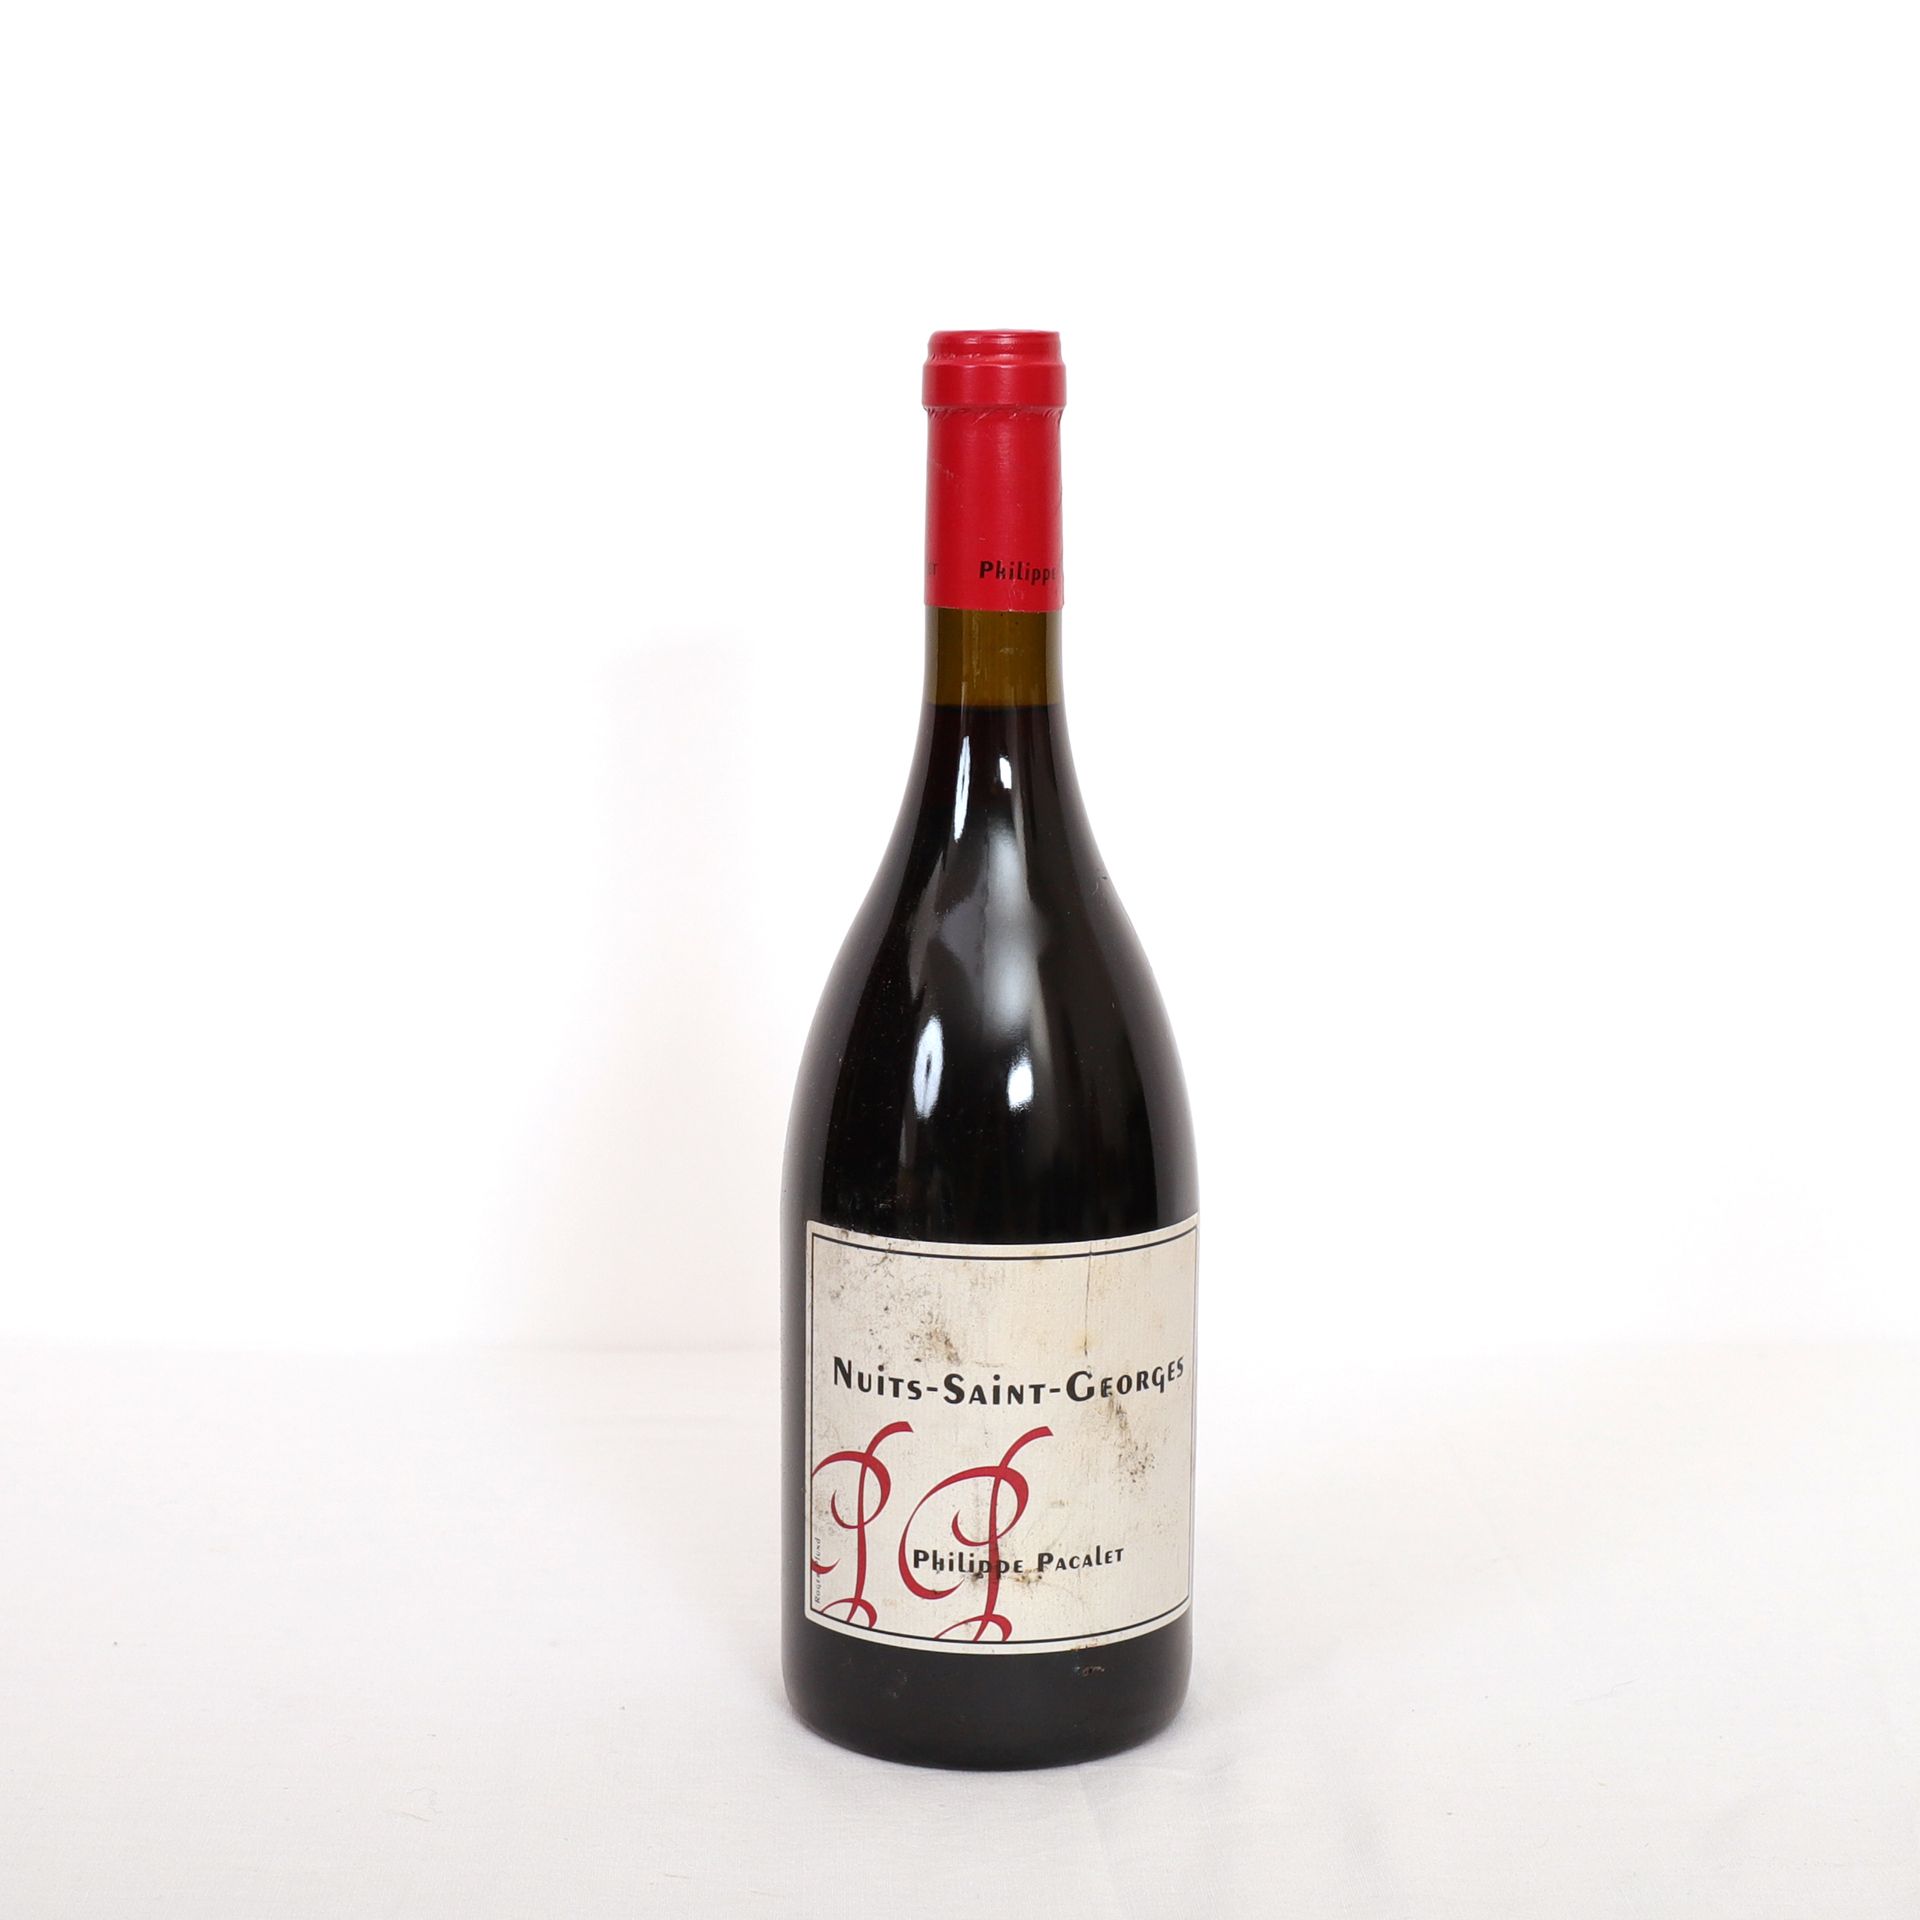 Null 1 Btl Bourgogne, Nuits-Saint-Georges Philippe Pacalet 2009

HE, traces d'hu&hellip;